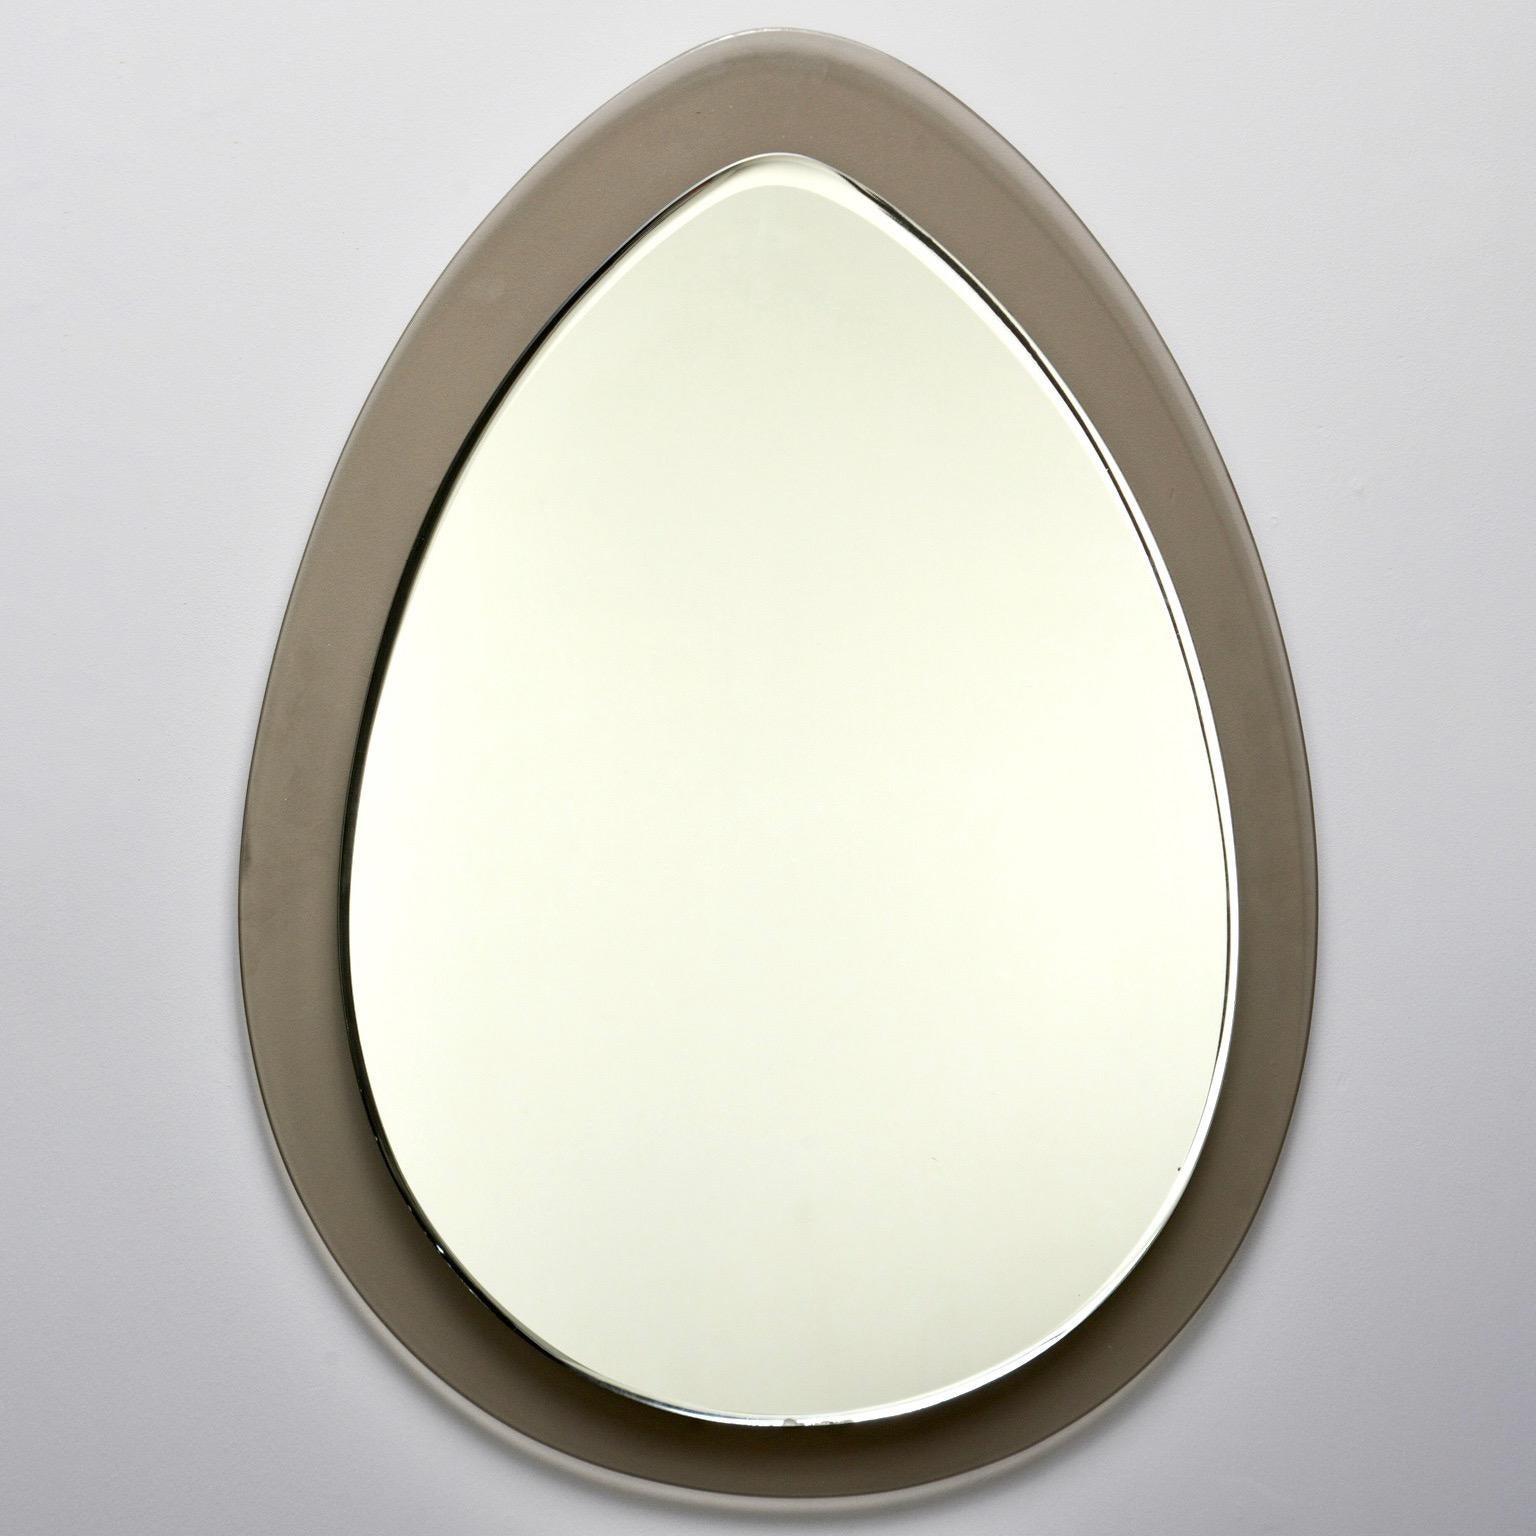 Italian wall mirror in style of Fontana Arte or crystal Arte features a tear drop shaped mirror with wide, taupe colored glass frame. Secured on back with metal hardware, circa 1970s. Unknown maker.
Actual mirror size: 27” H x 19.25” W.